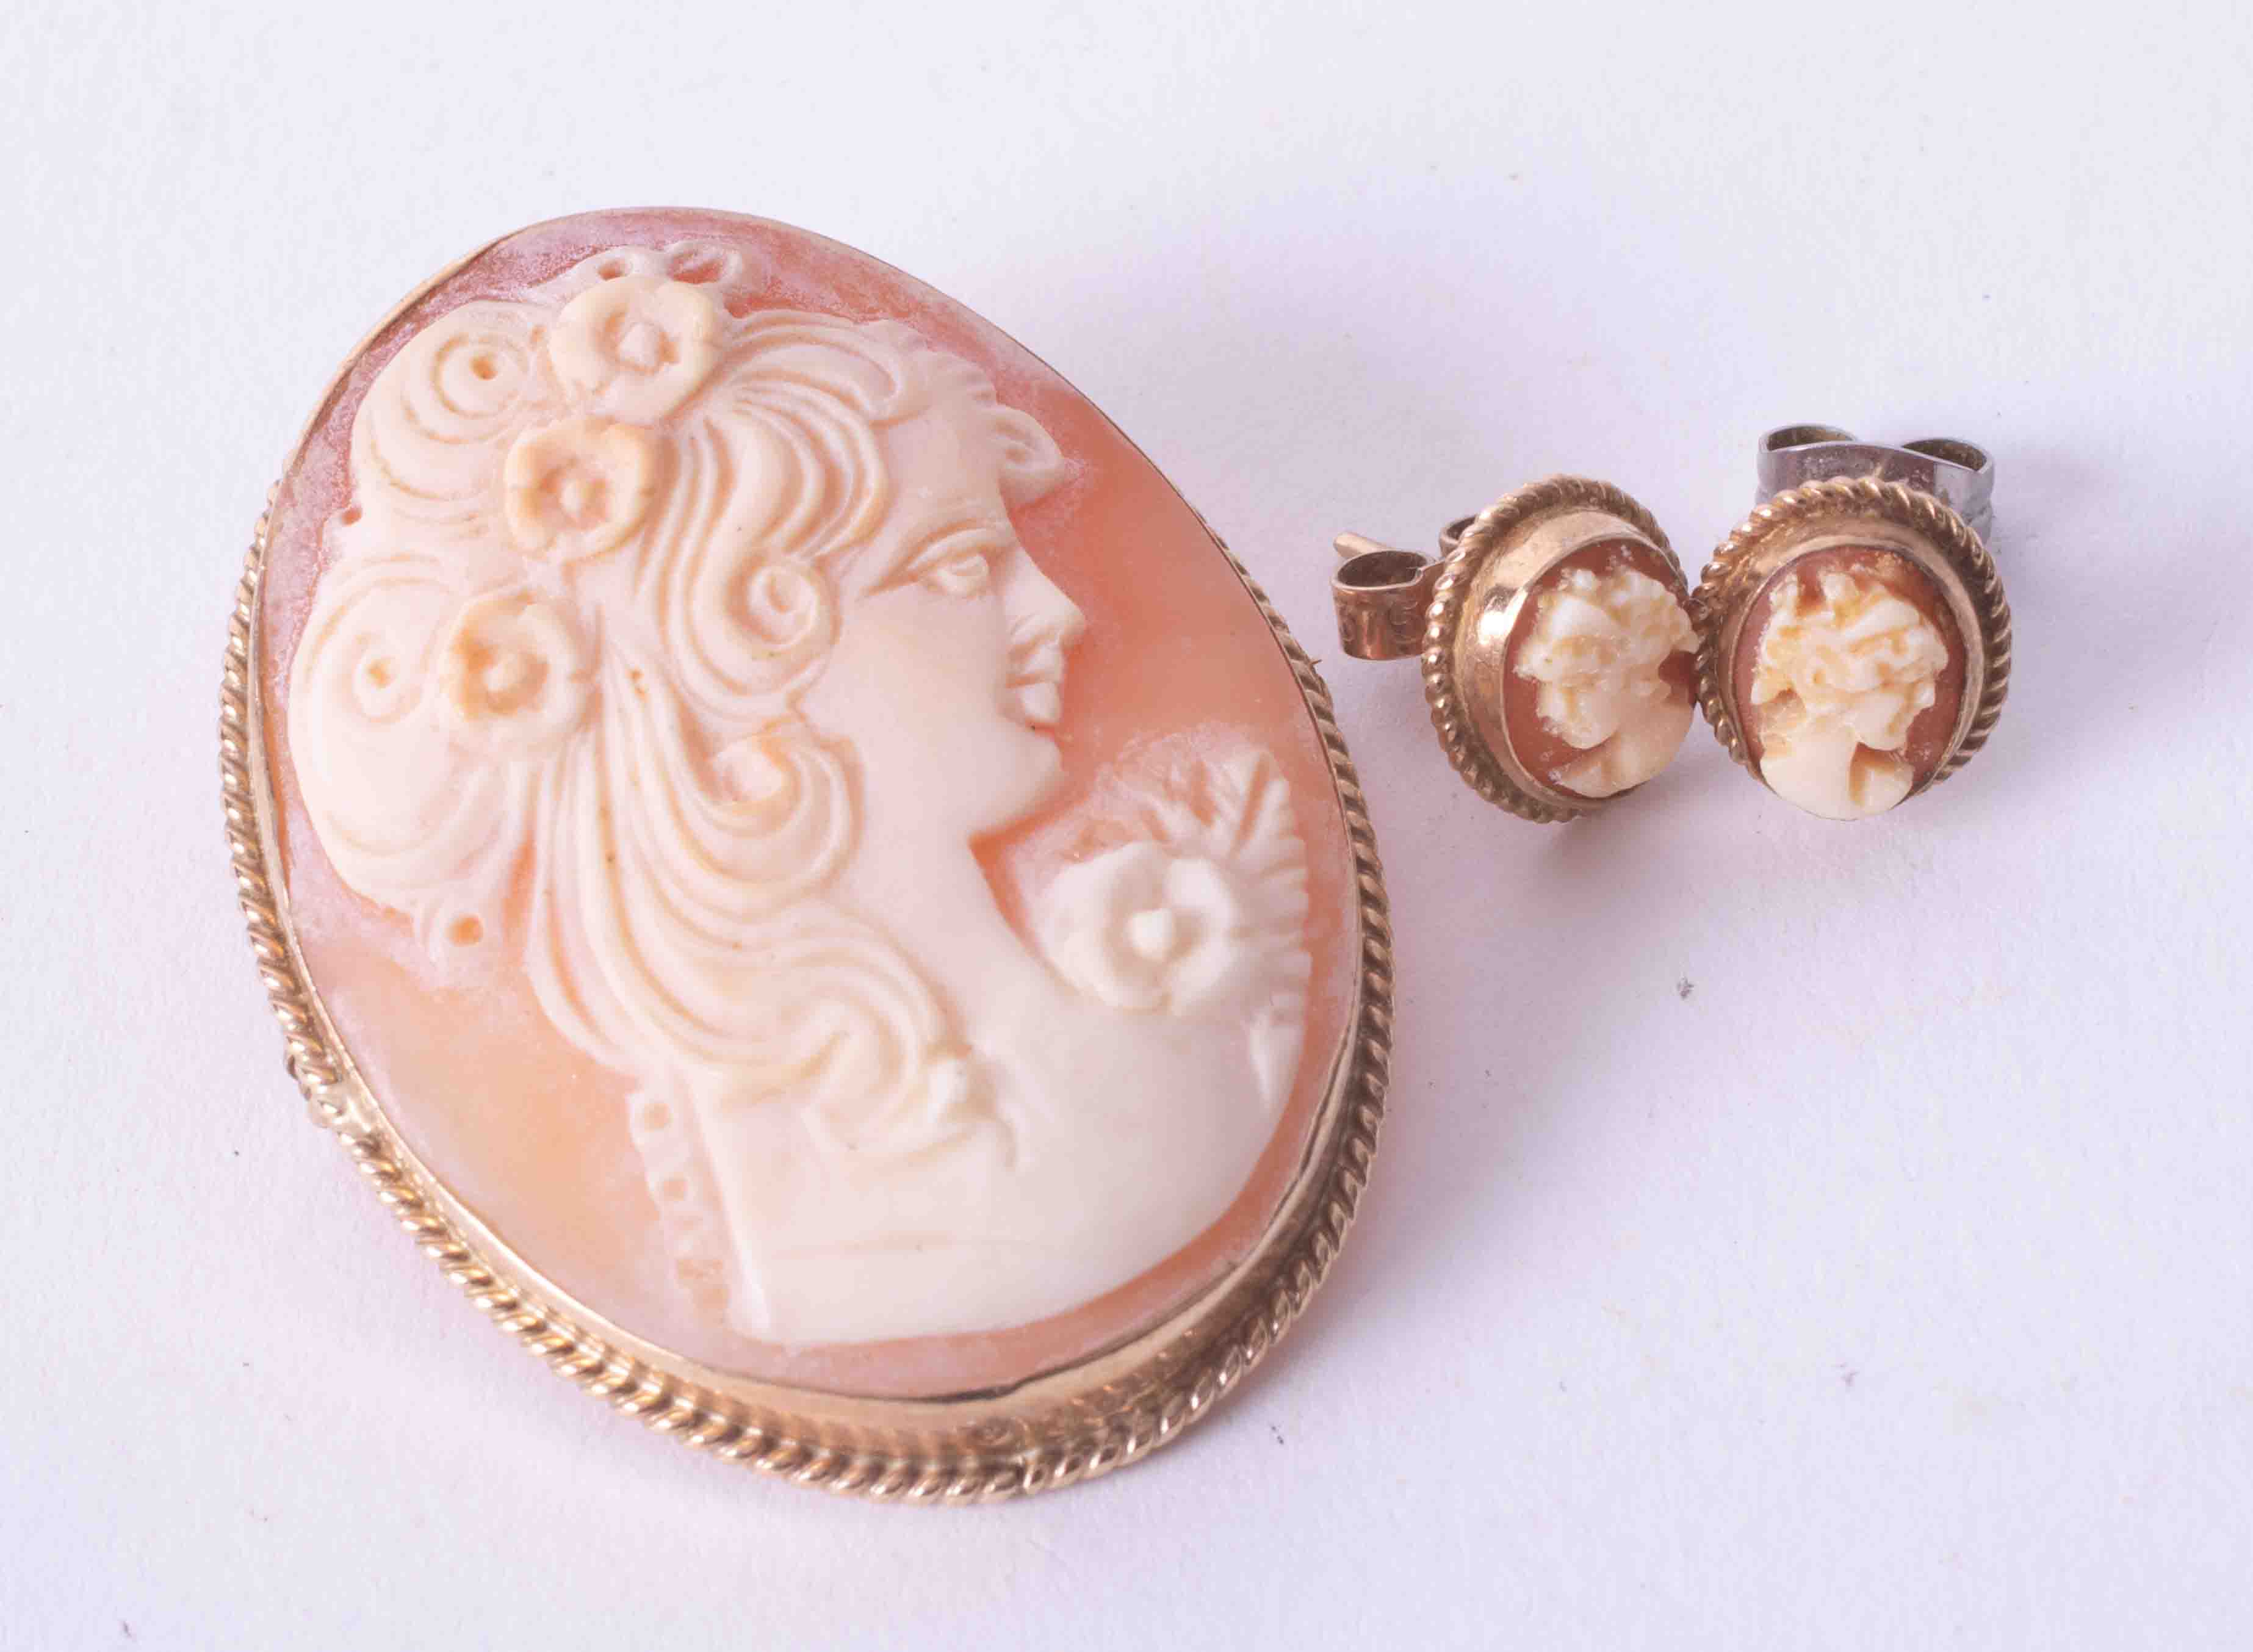 A 9ct yellow gold Cameo brooch & pendant, weight 6.70g, measuring approx. 4.5cm (from